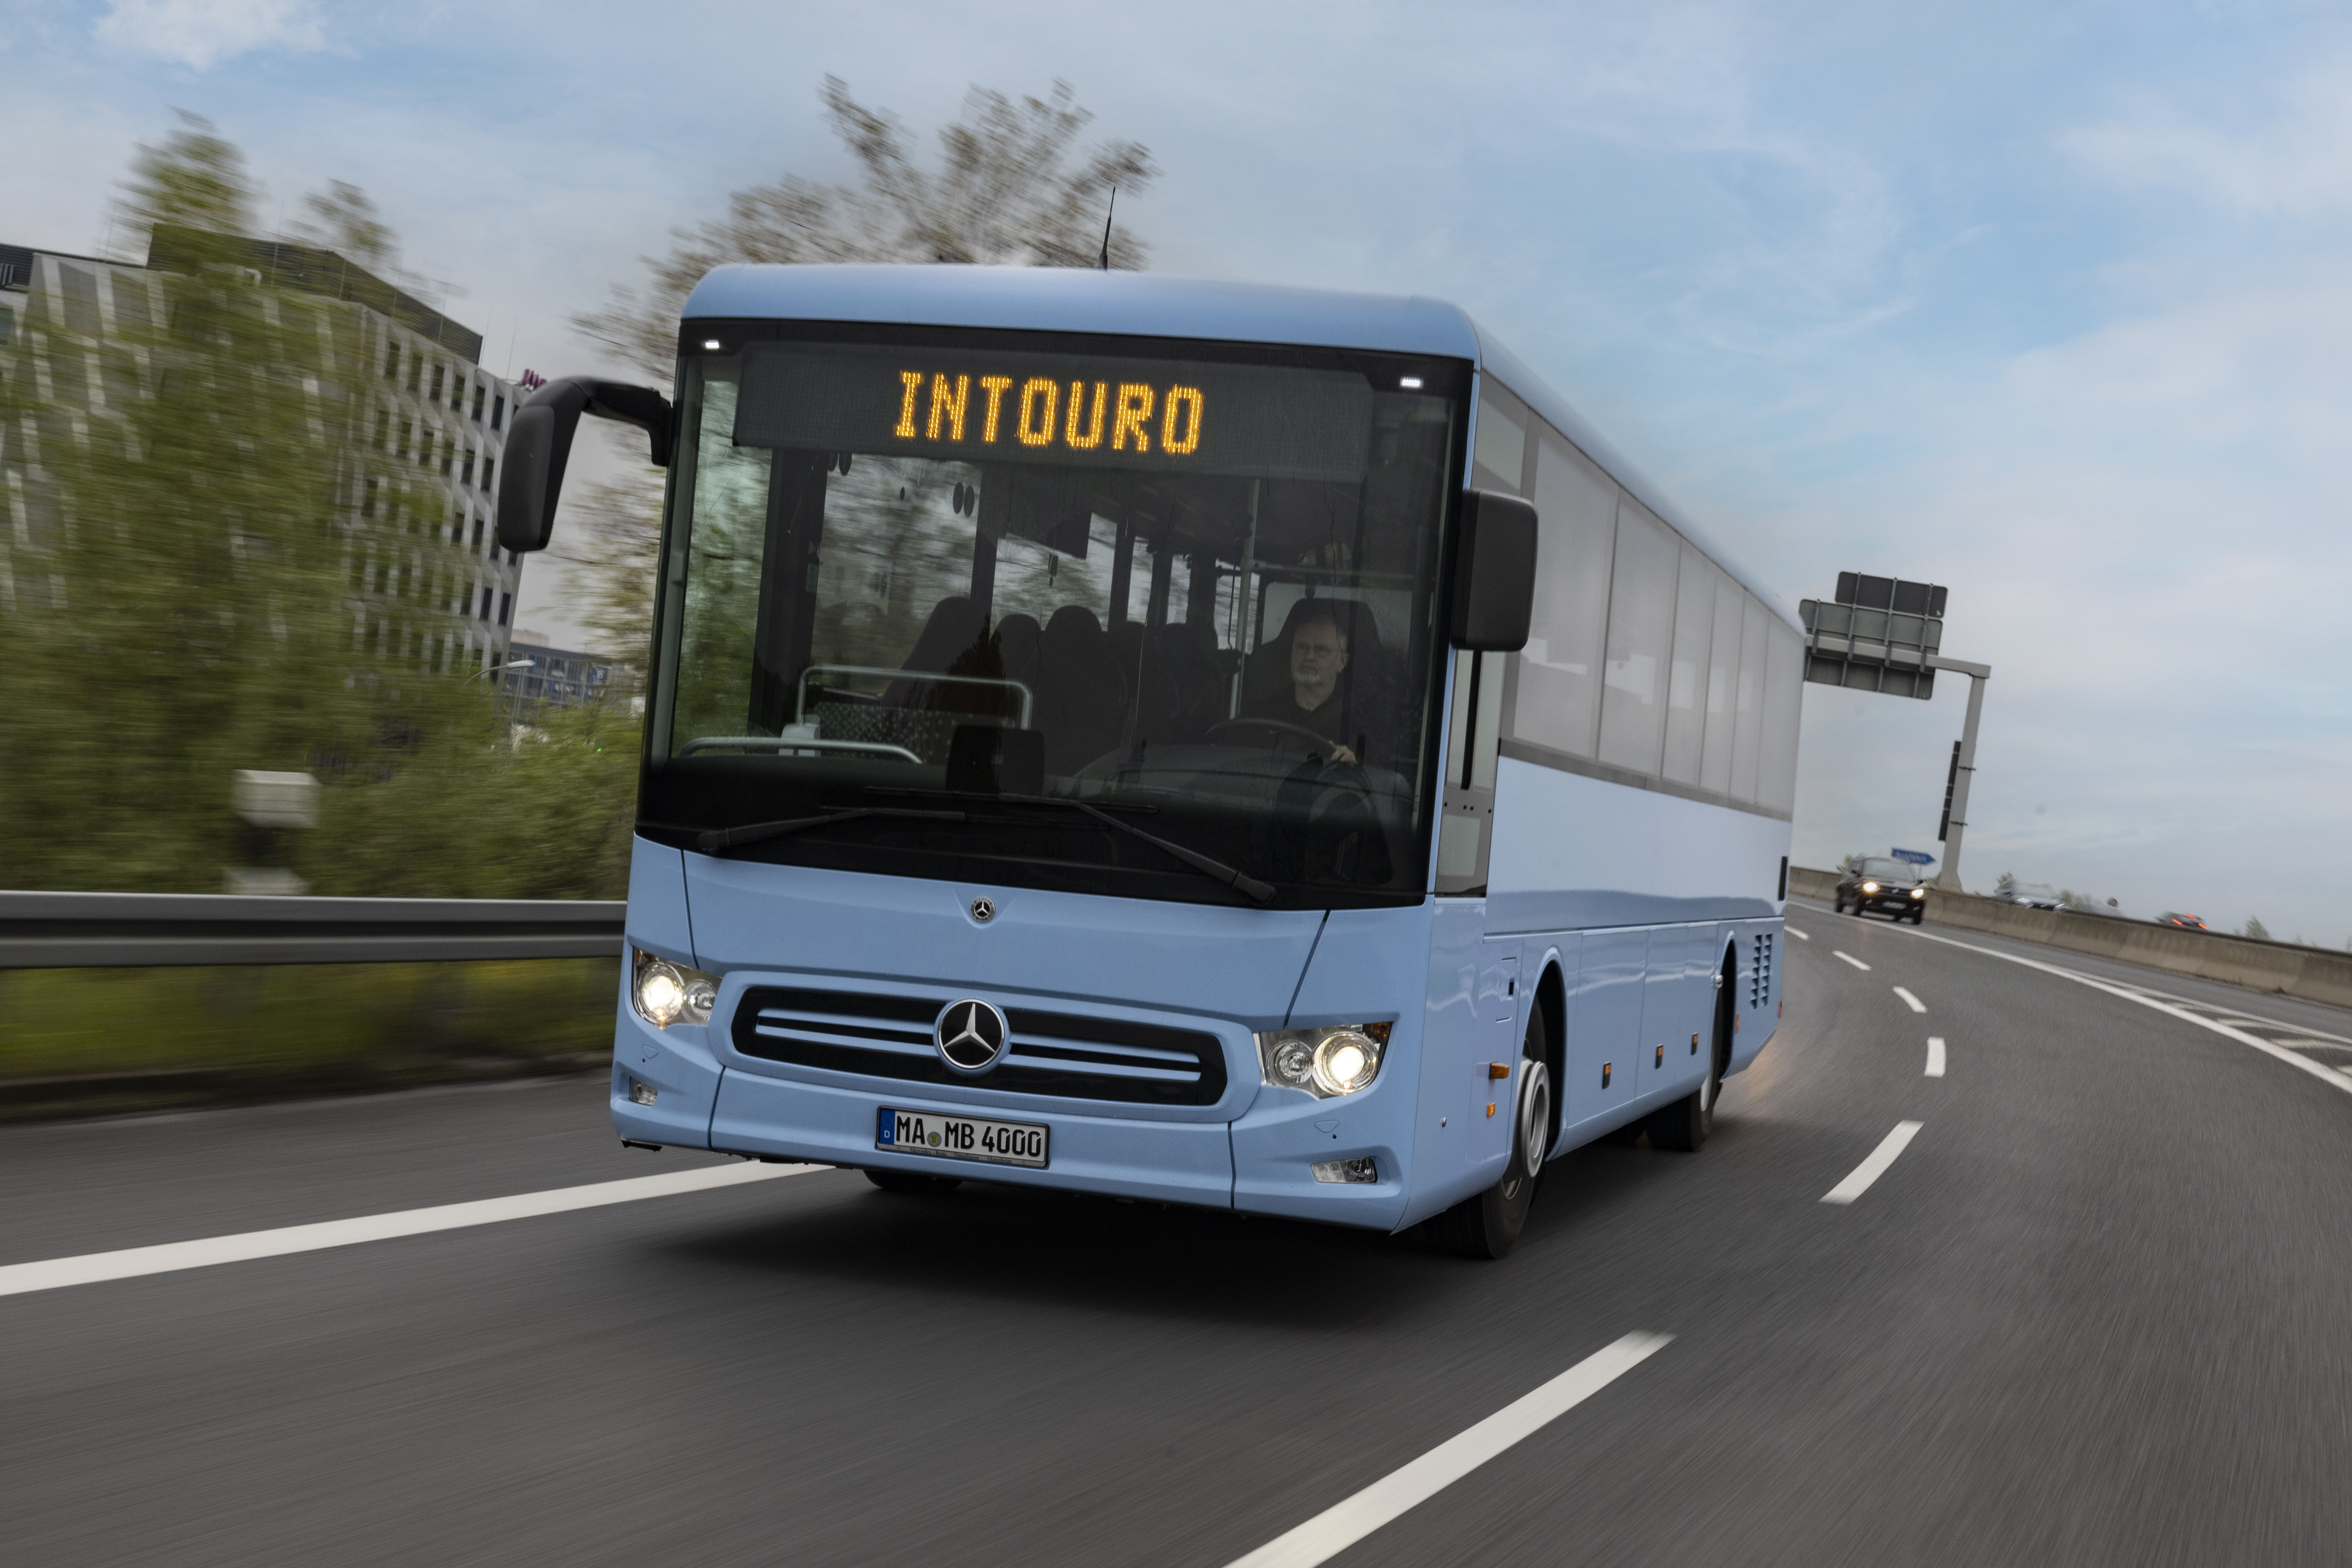 Read more about the article Mercedes-Benz Intouro K hybrydowy autobus międzymiastowy Kompaktowy autobus międzymiastowy z superkondensatorami („supercaps”)